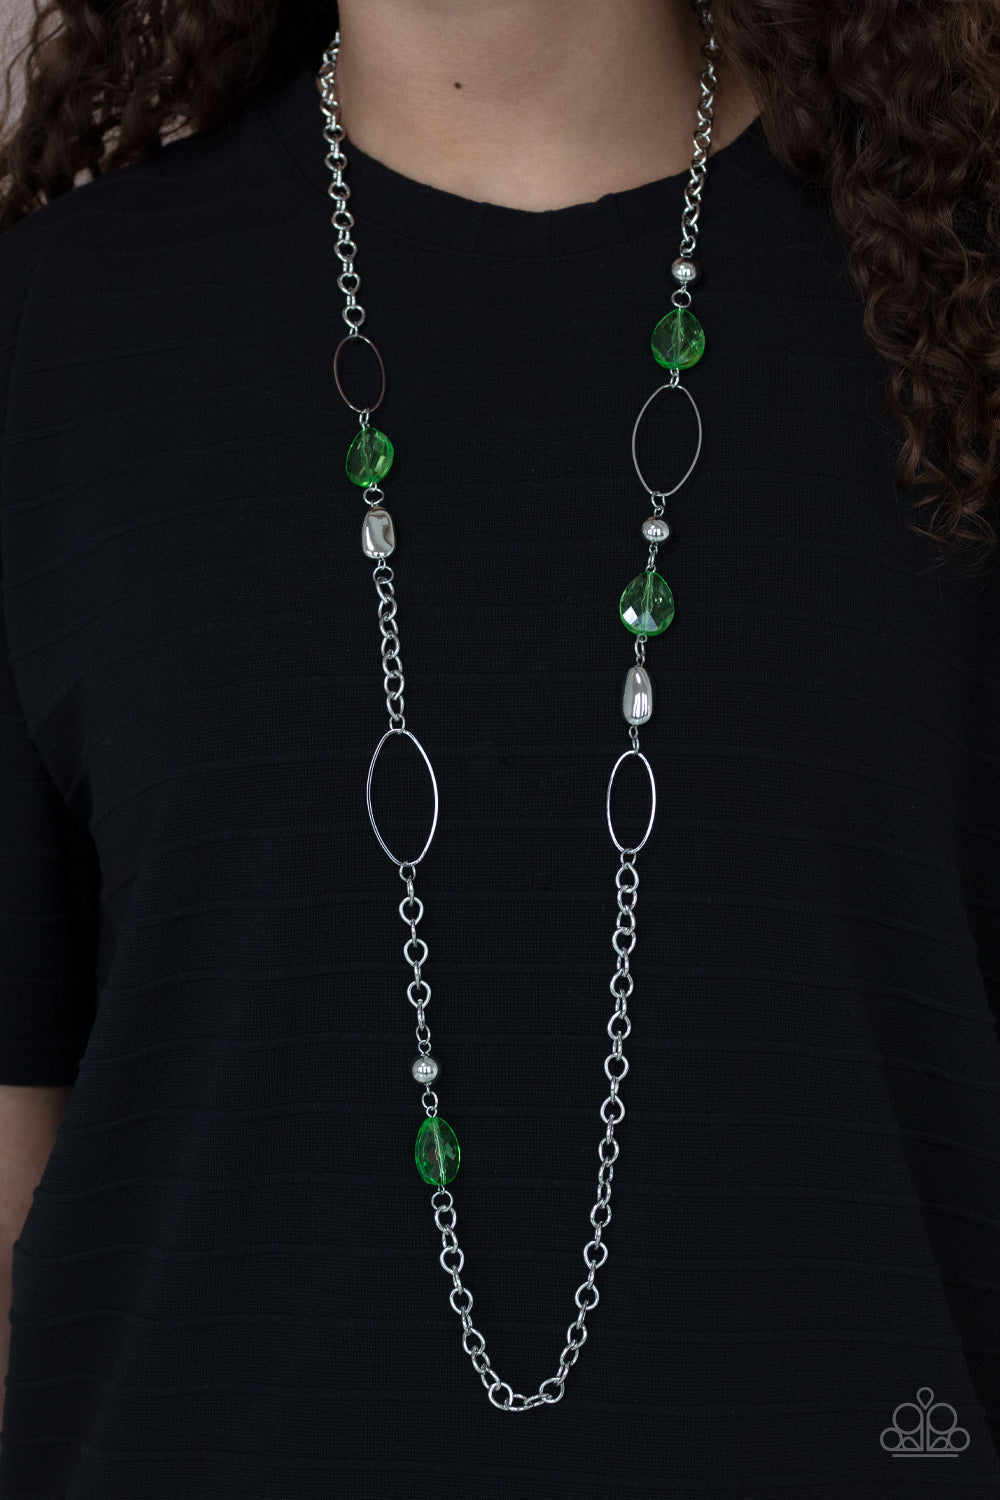 SHEER As Fate - Green and Silver Necklace - Paparazzi Accessories - Faceted Apple Green teardrop beads, dainty oval hoops, and silver accent beads descend along a silver chain in a whimsical pattern.